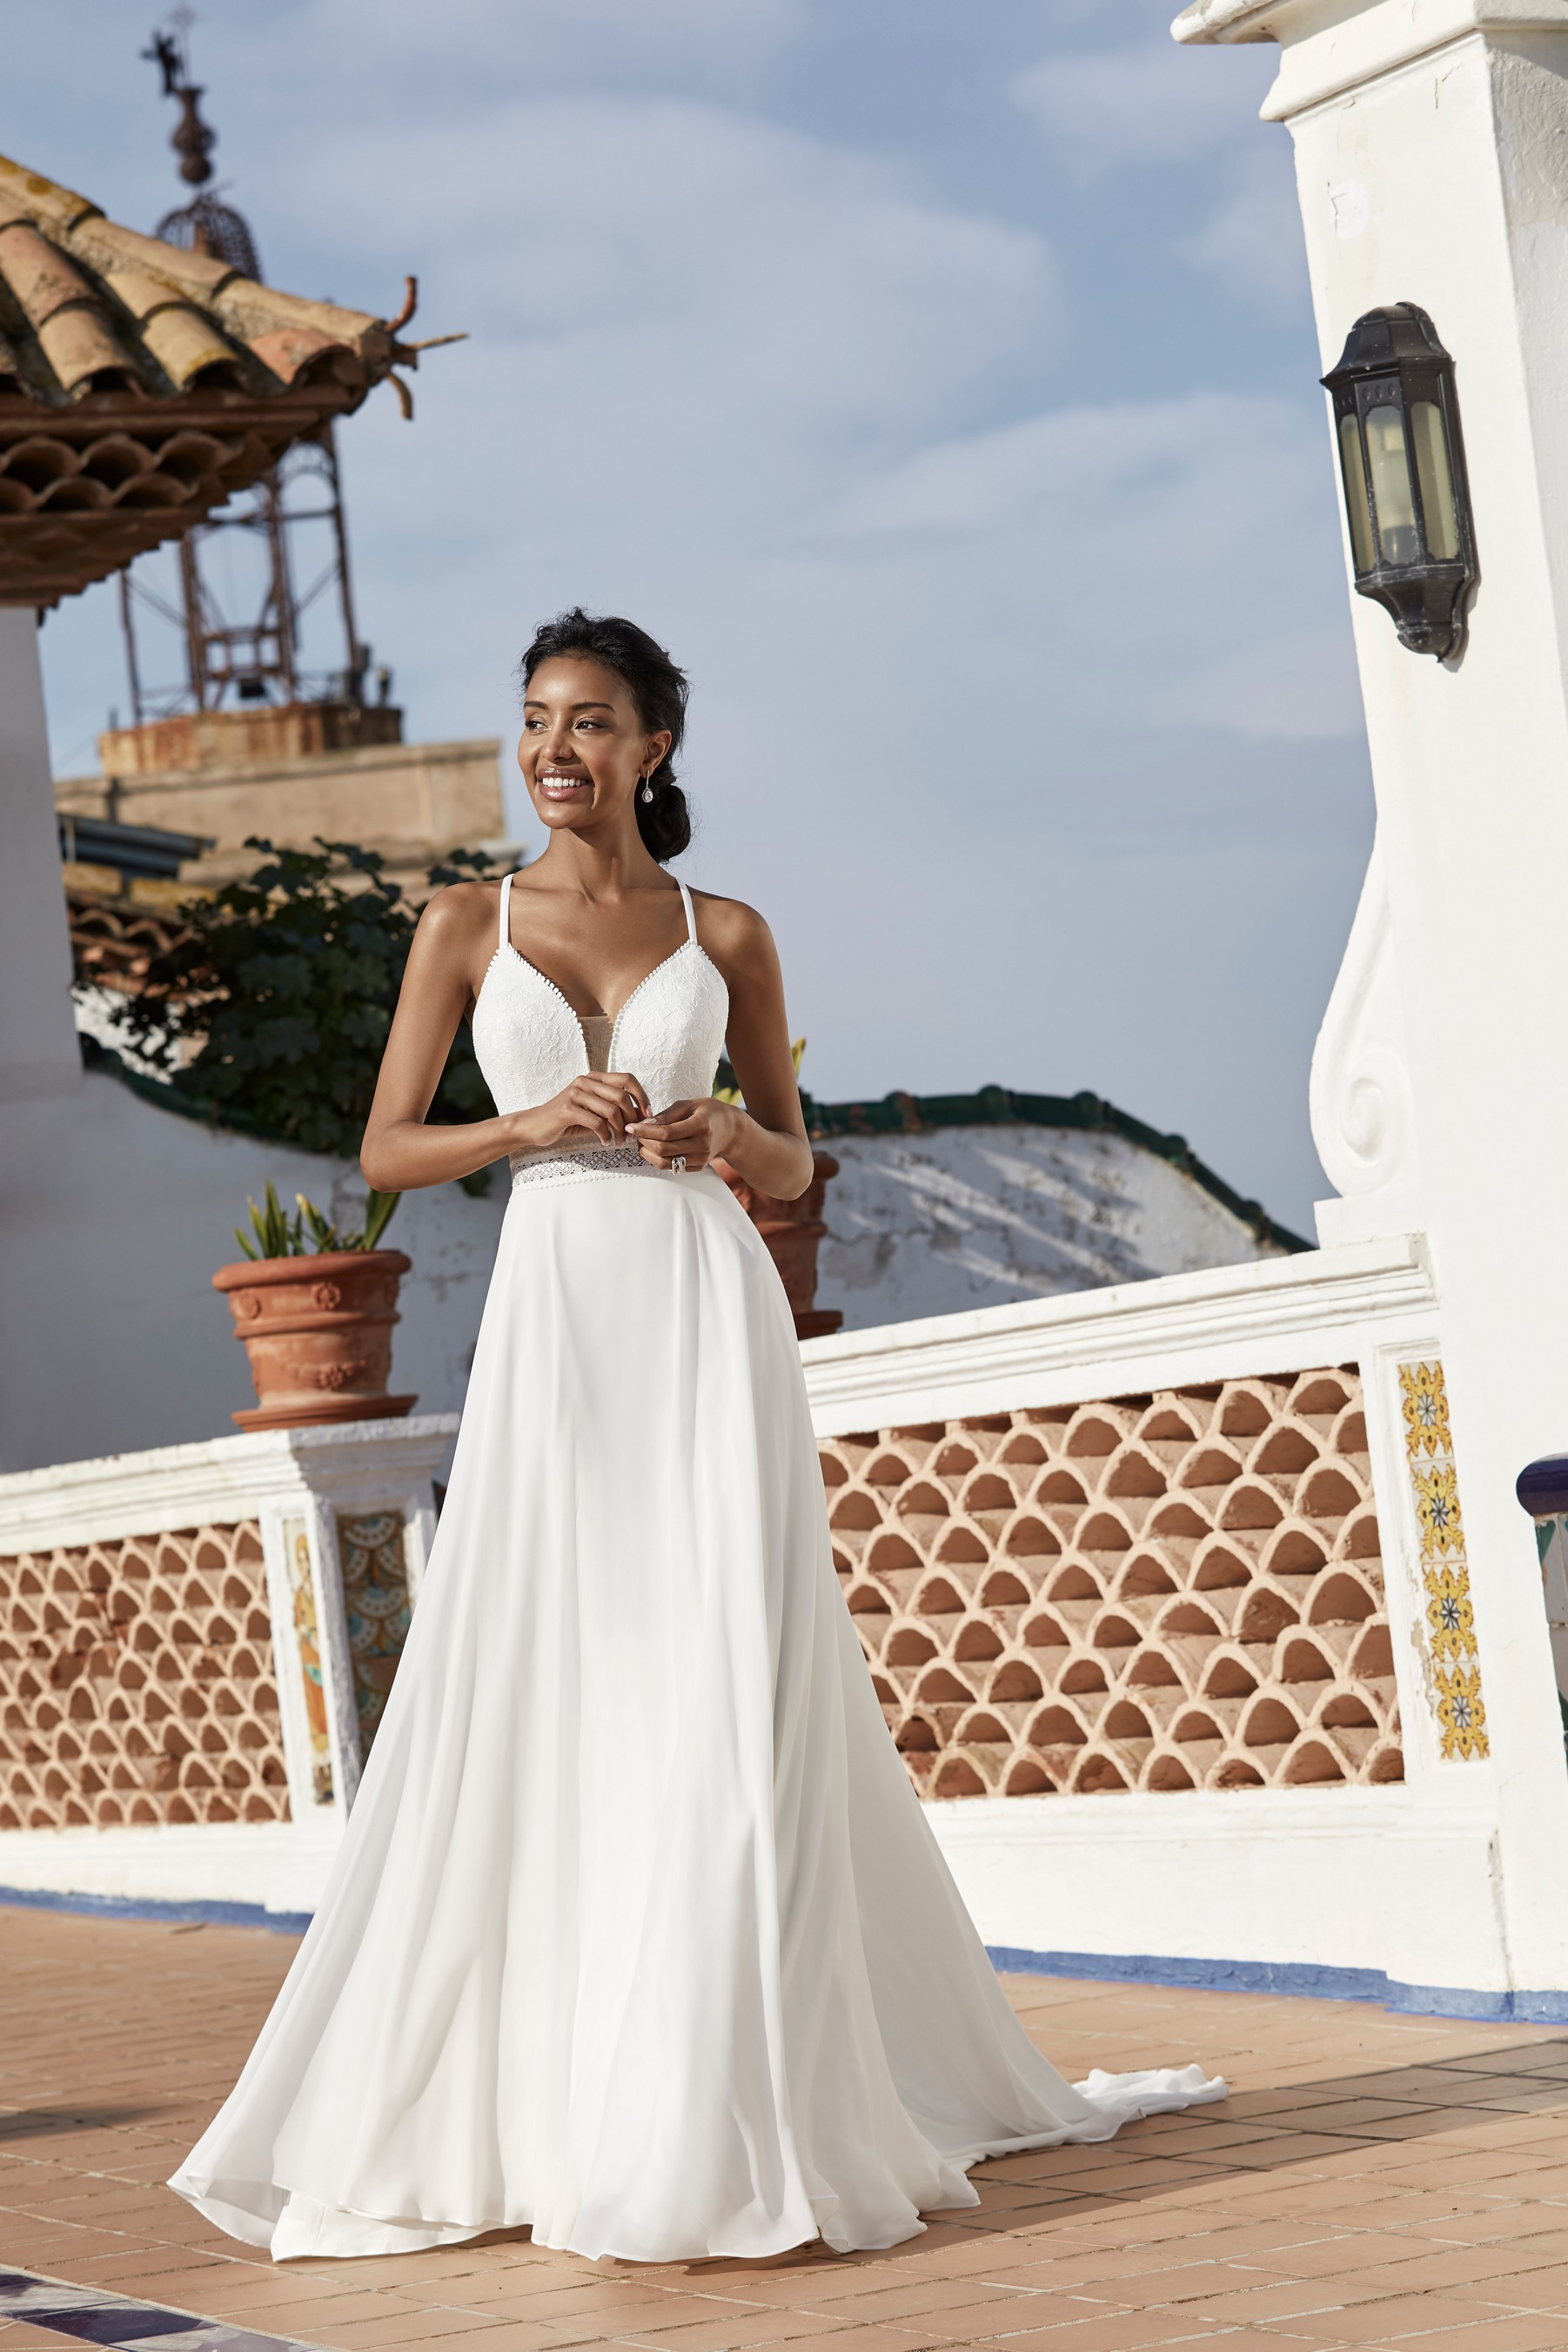 Model stood on a Spanish terrace in Victoria Jane style 18560, a plain A-line destination wedding gown with a plunging illusion neckline, delicate straps and crochet waistband 